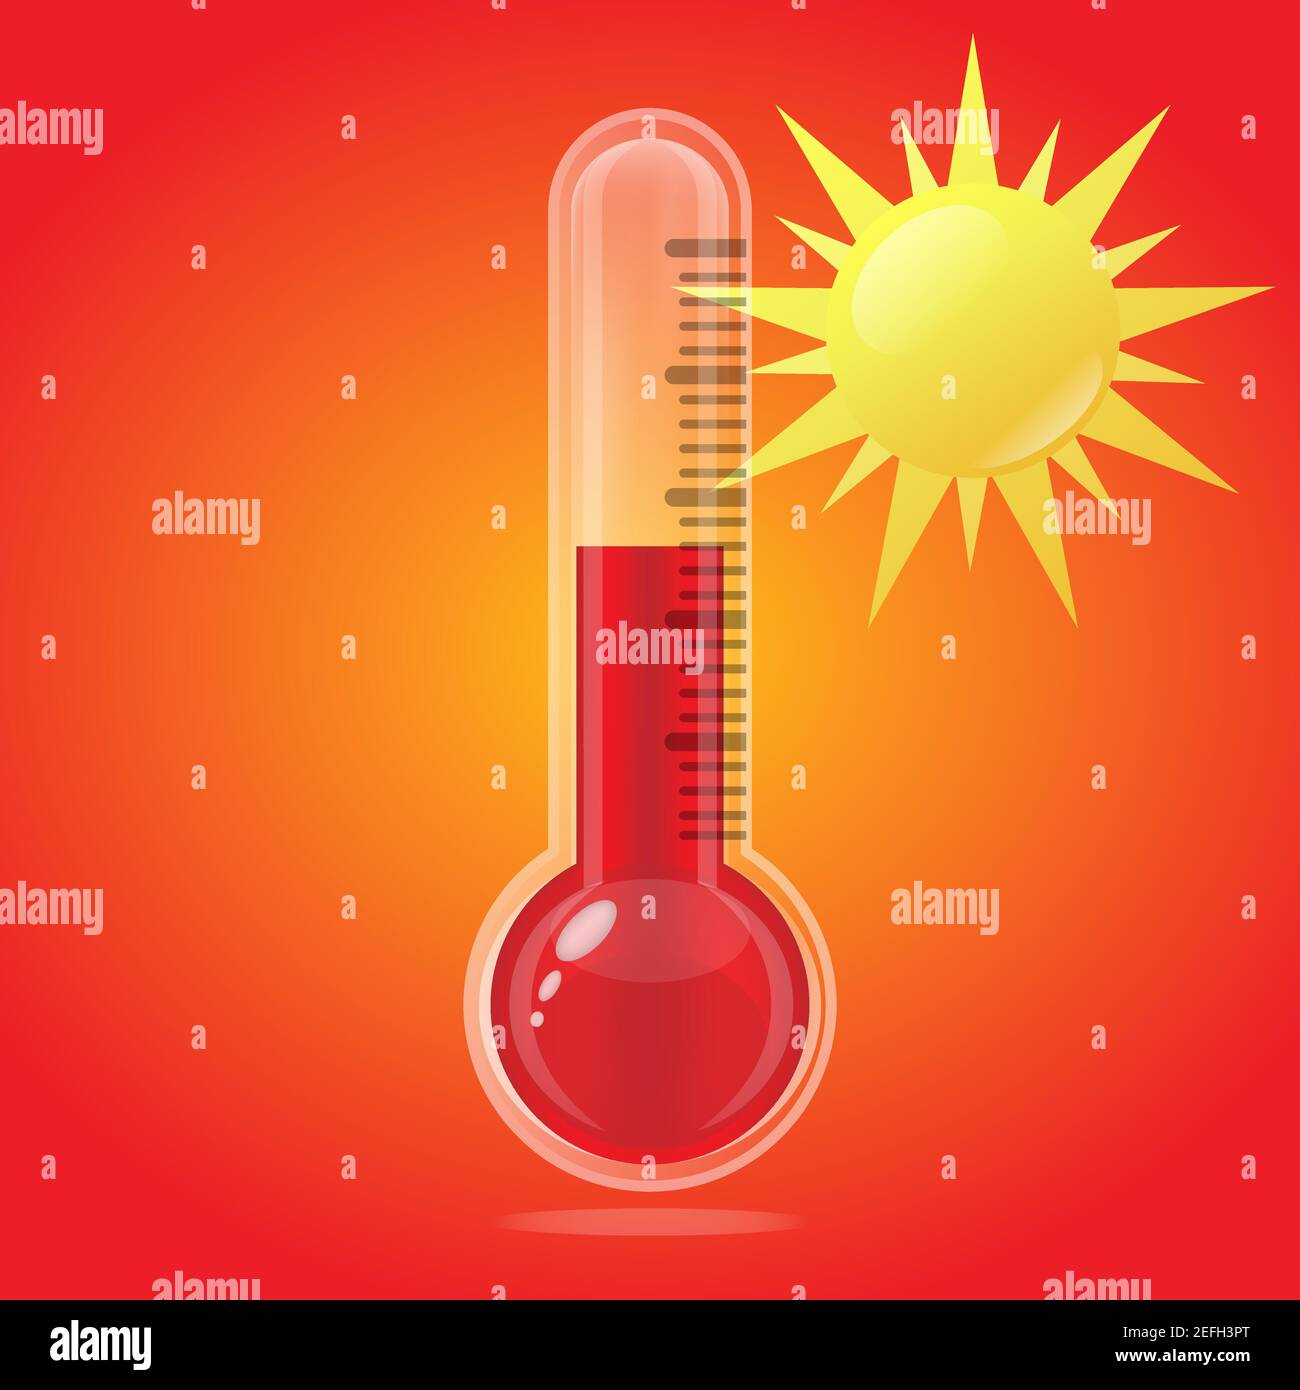 https://c8.alamy.com/comp/2EFH3PT/thermometer-with-sun-graphic-icon-thermometer-with-hot-weather-sign-isolated-symbol-on-orange-background-vector-illustration-2EFH3PT.jpg